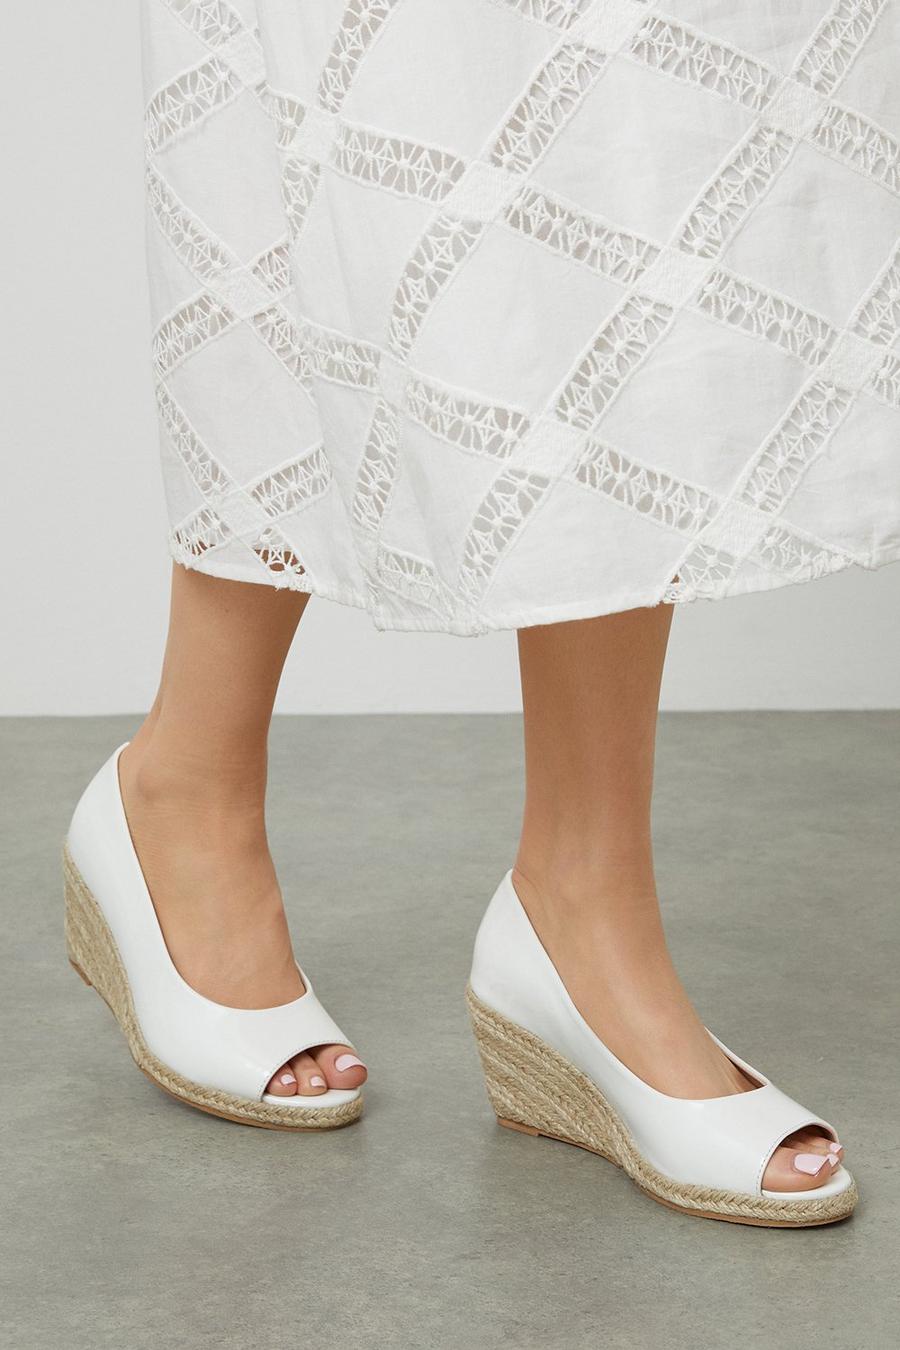 Good For The Sole: Wide Fit Heather Peep Toe Wedges